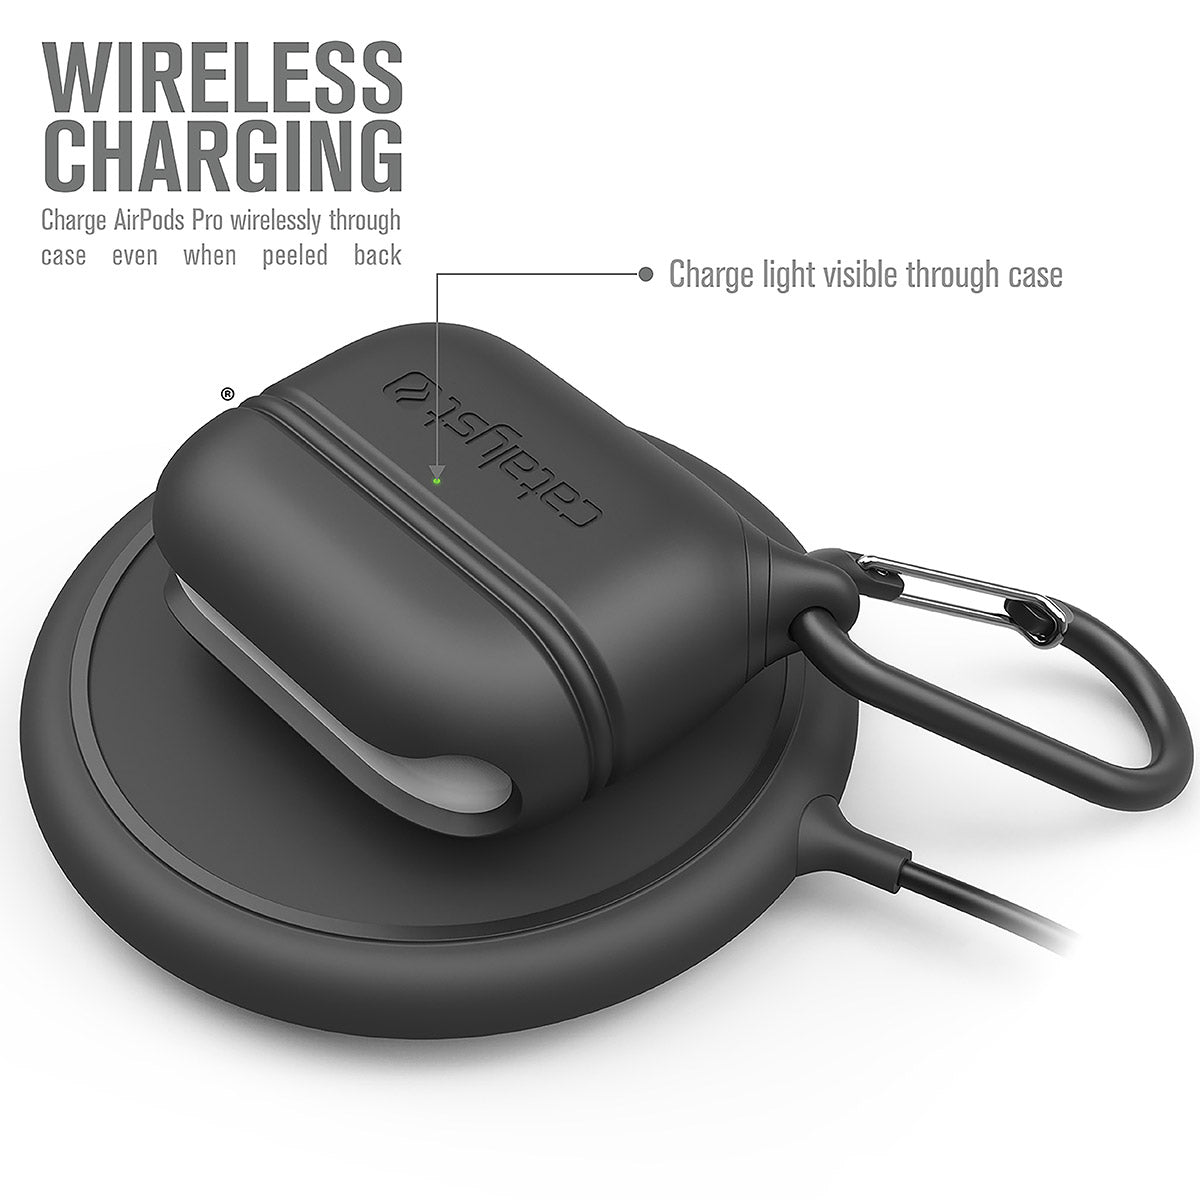 CATAPLAPDPROBLK | catalyst airpods pro gen 2 1 waterproof case carabiner special edition black on top of a wireless charger text reads wireless charging charge airpods pro wirelessly through case even when peeled back charge light visible through case